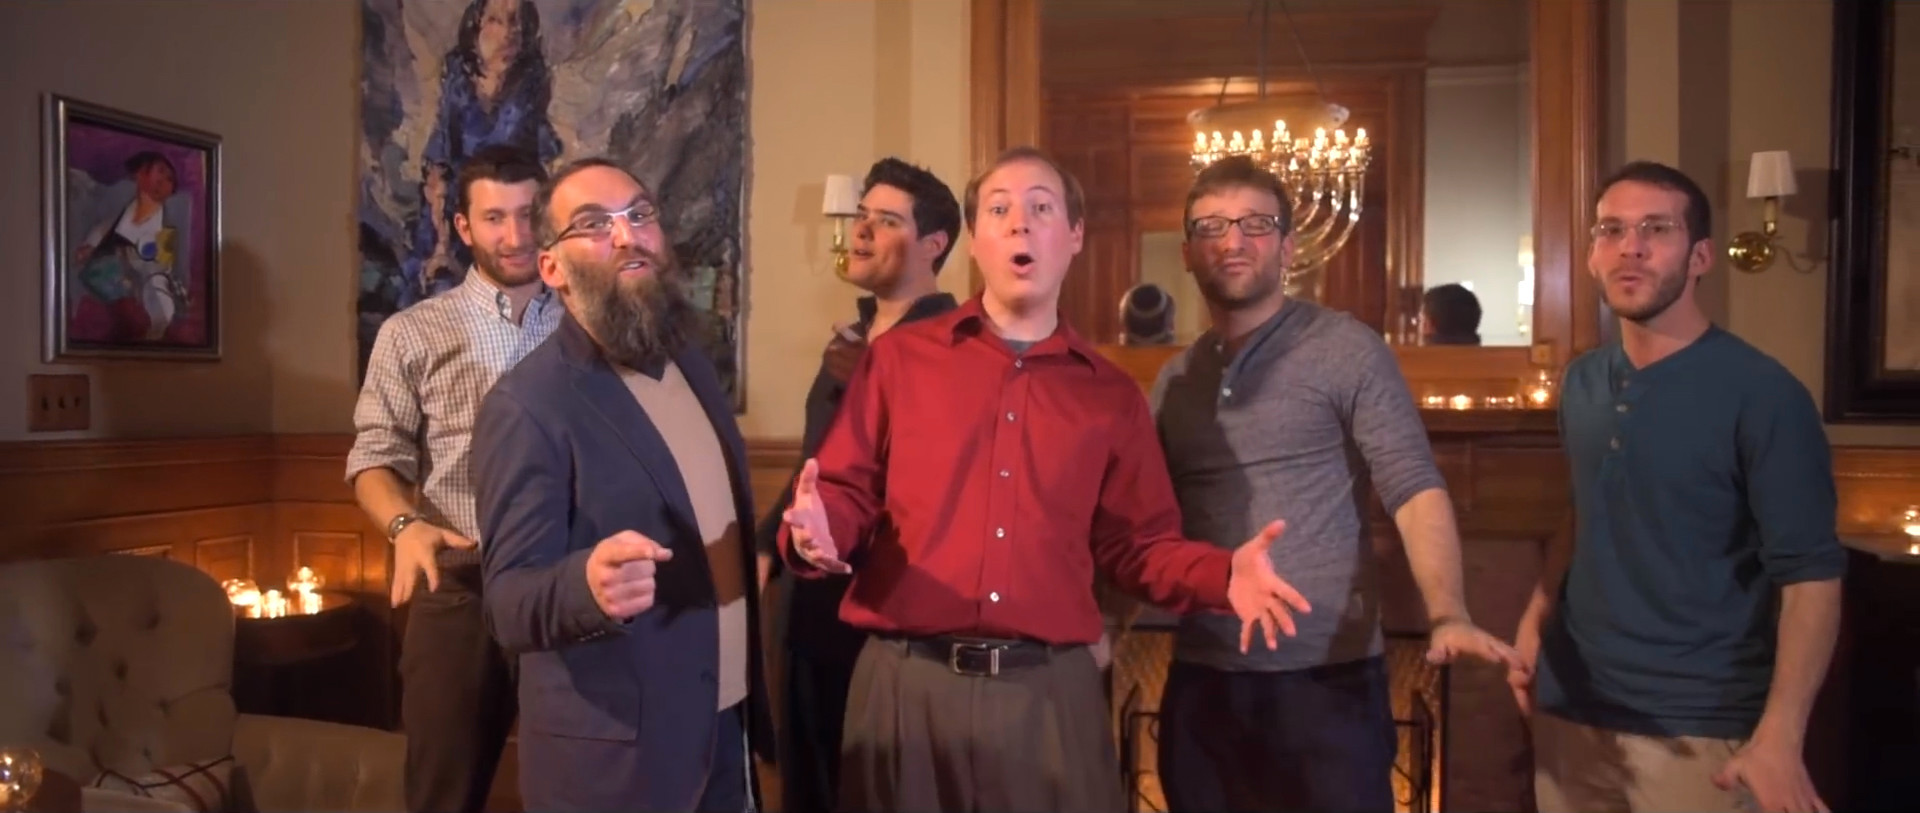 Shir Soul released a music video of its song “Lift Yourself Up” for Hanukkah.